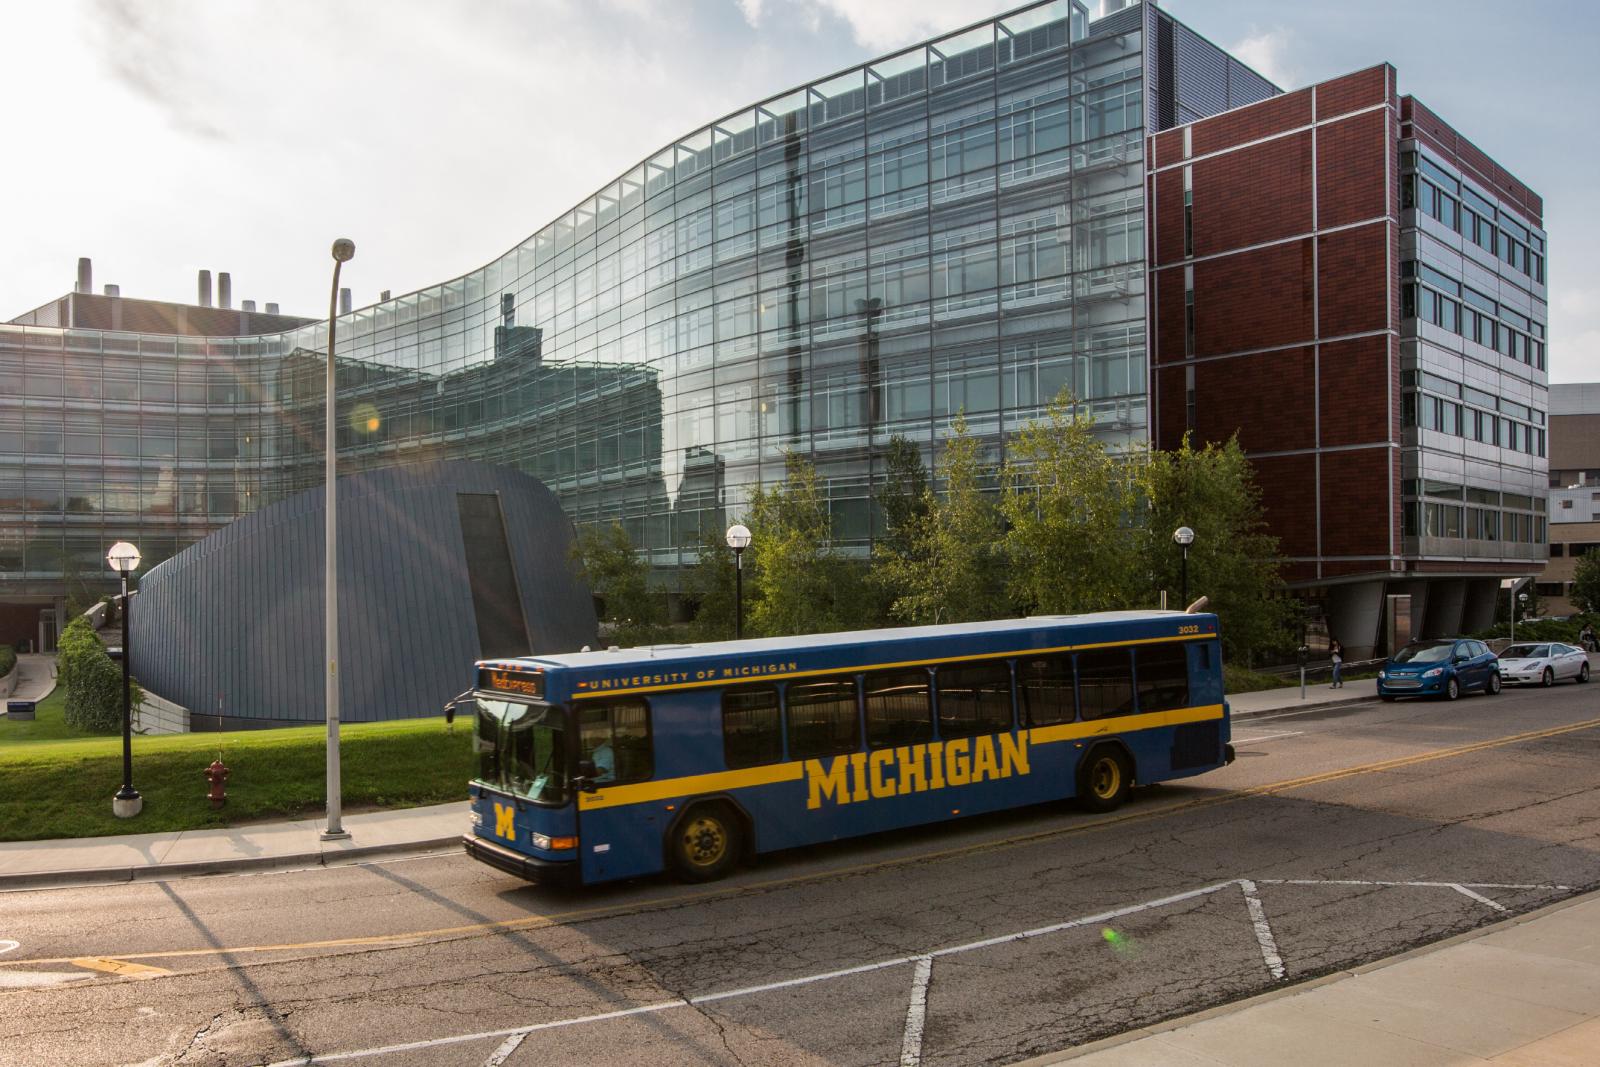 University of Michigan blue bus stops by the Biomedical Sciences Research Building